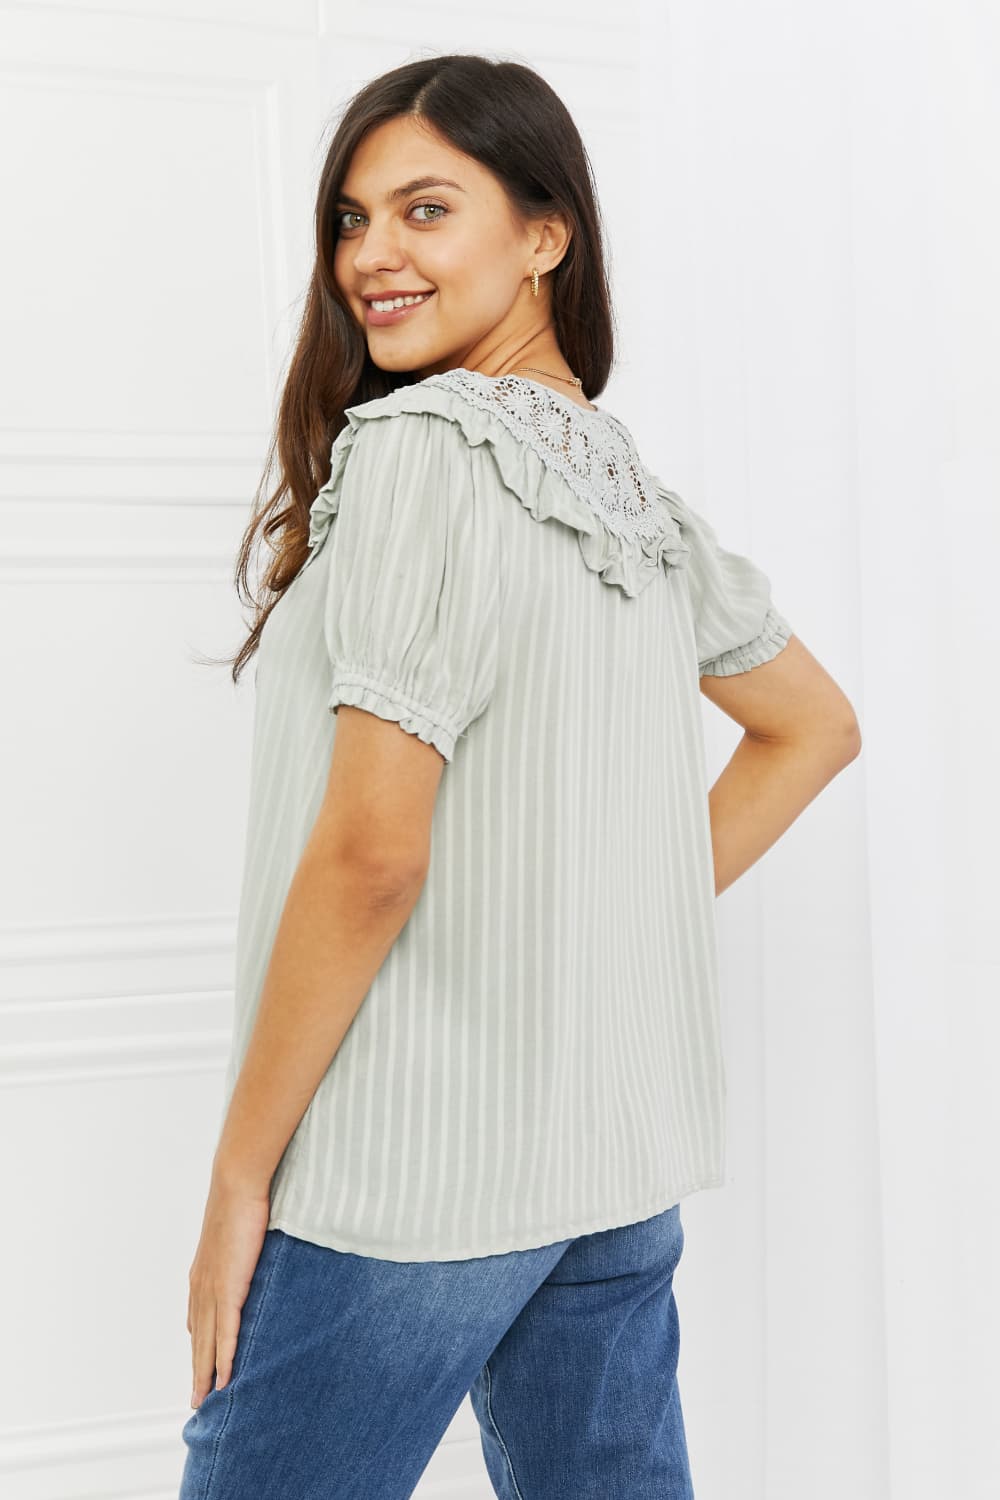 Short Sleeve Top in Ice MintTopHEYSON